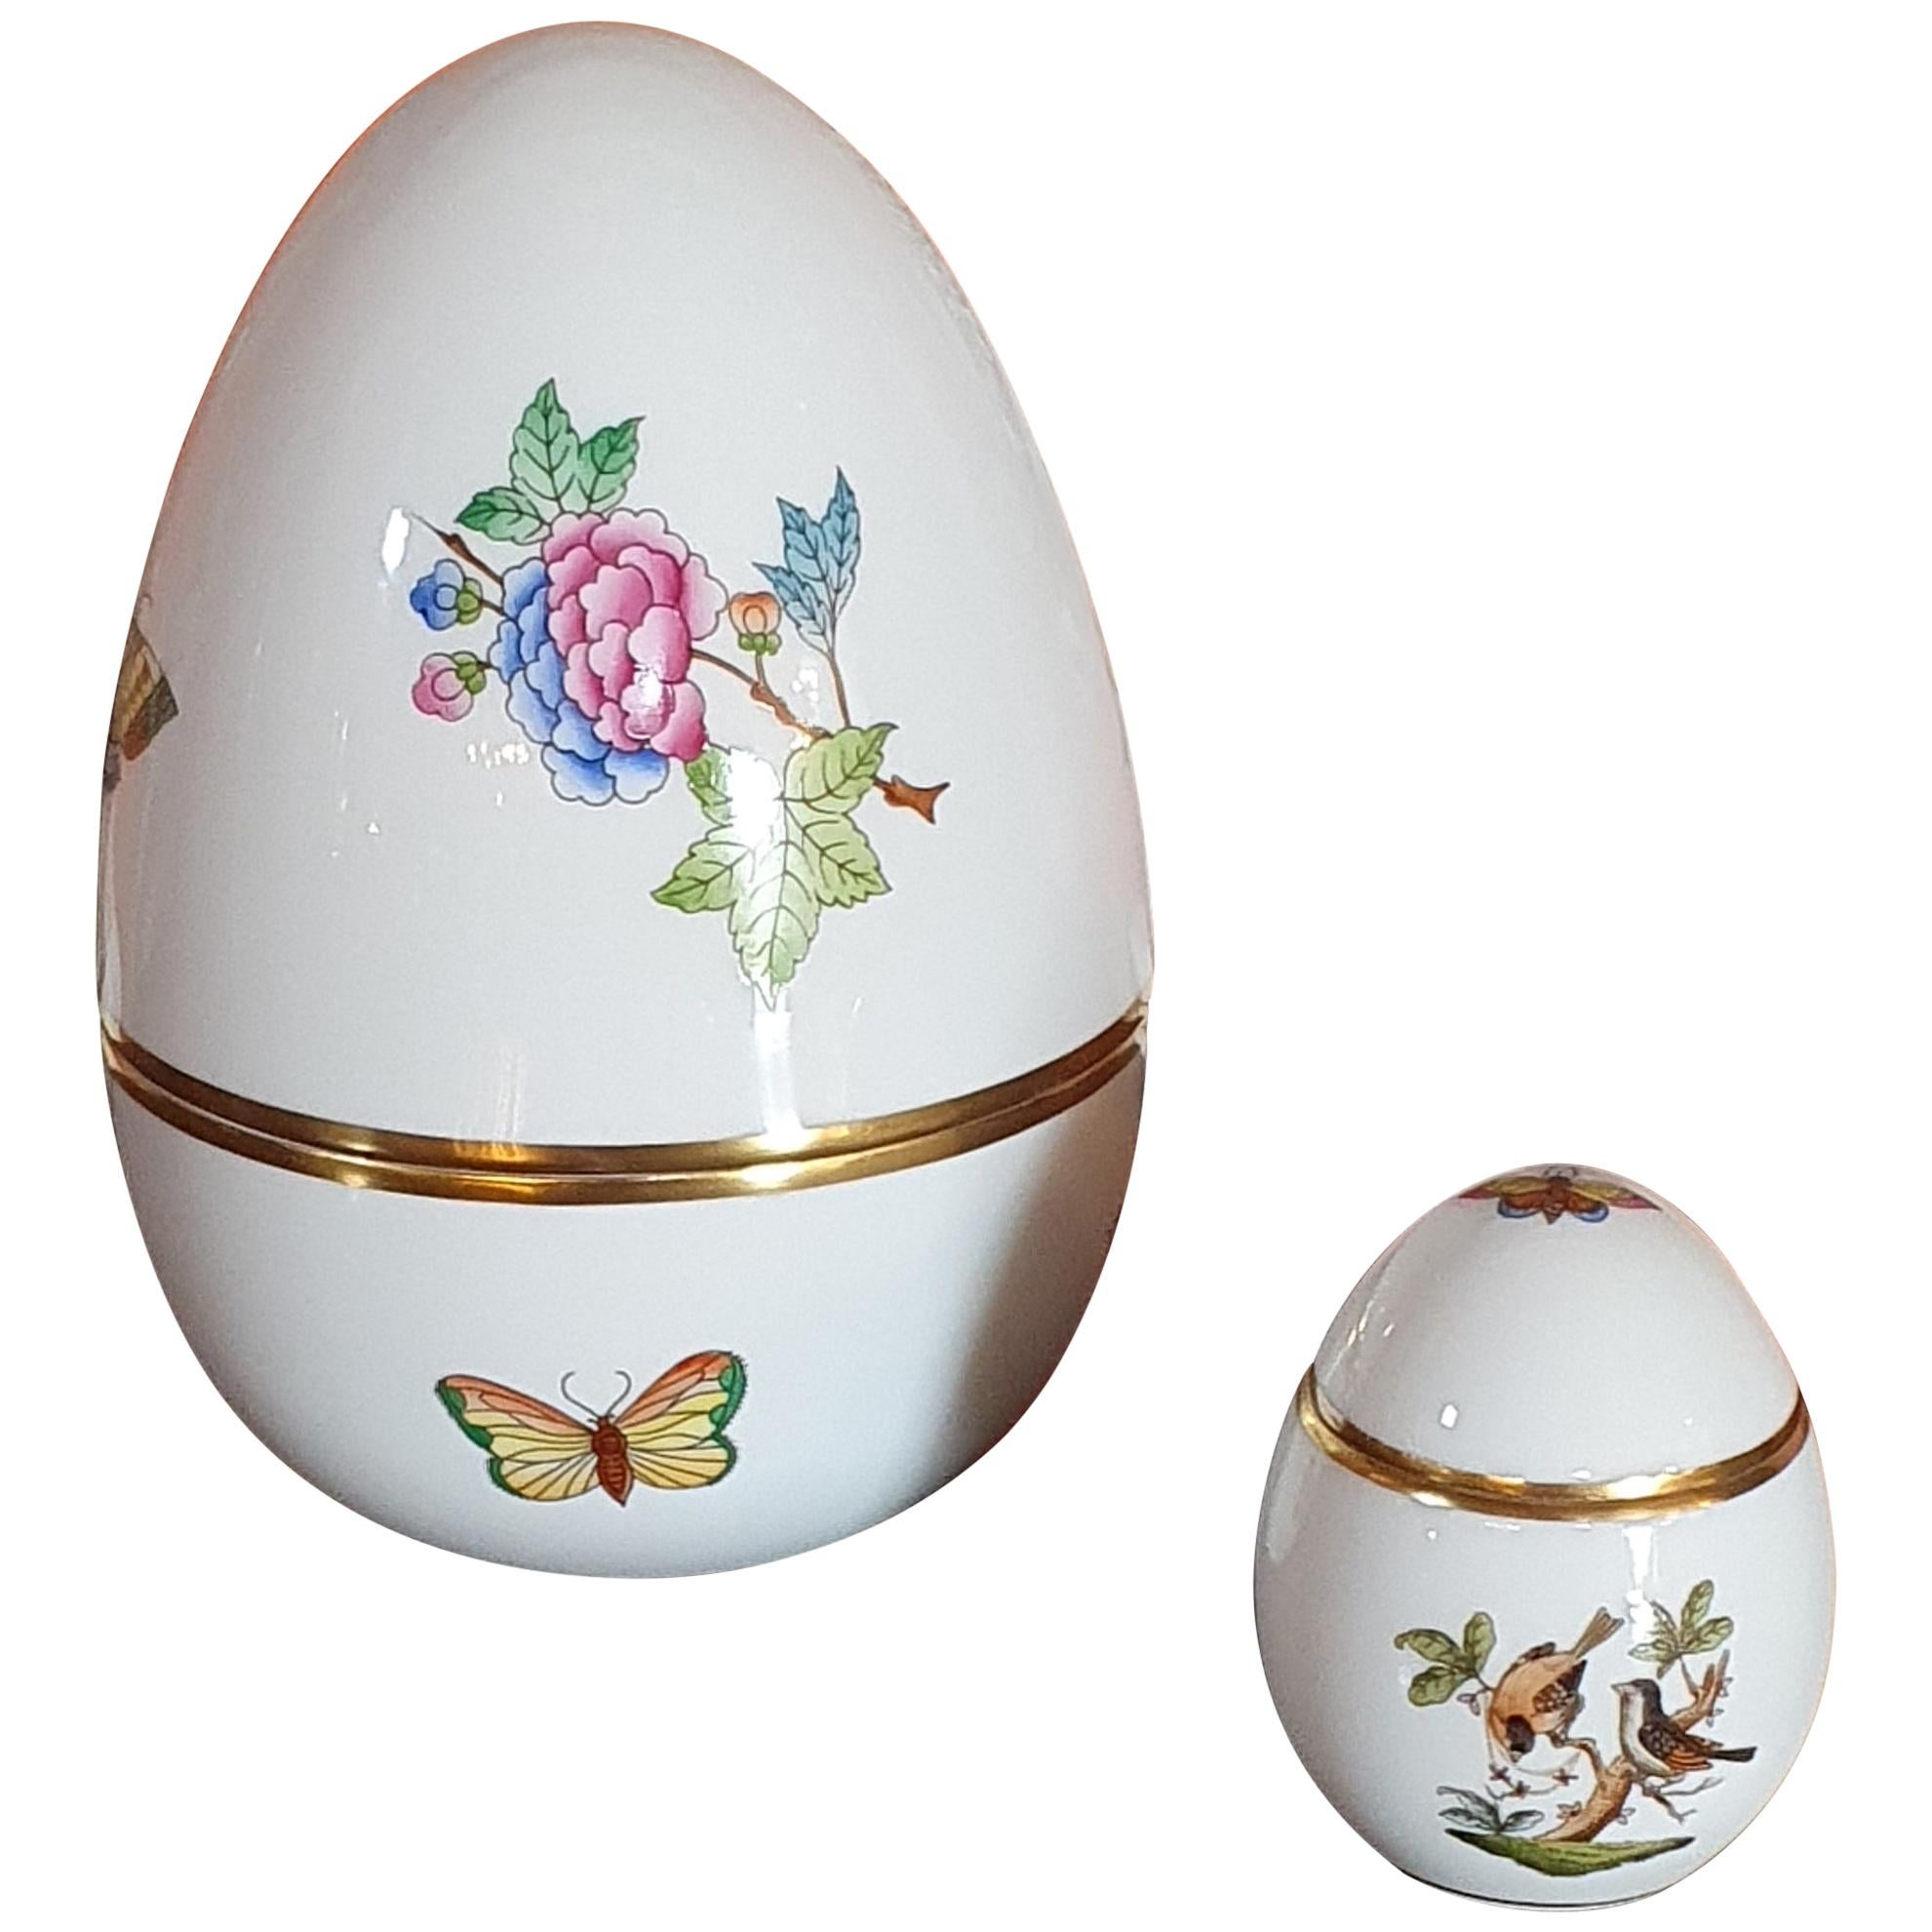 Herend Hand Painted Porcelain Set of Two Egg Boxes, Hungary, 2021, New